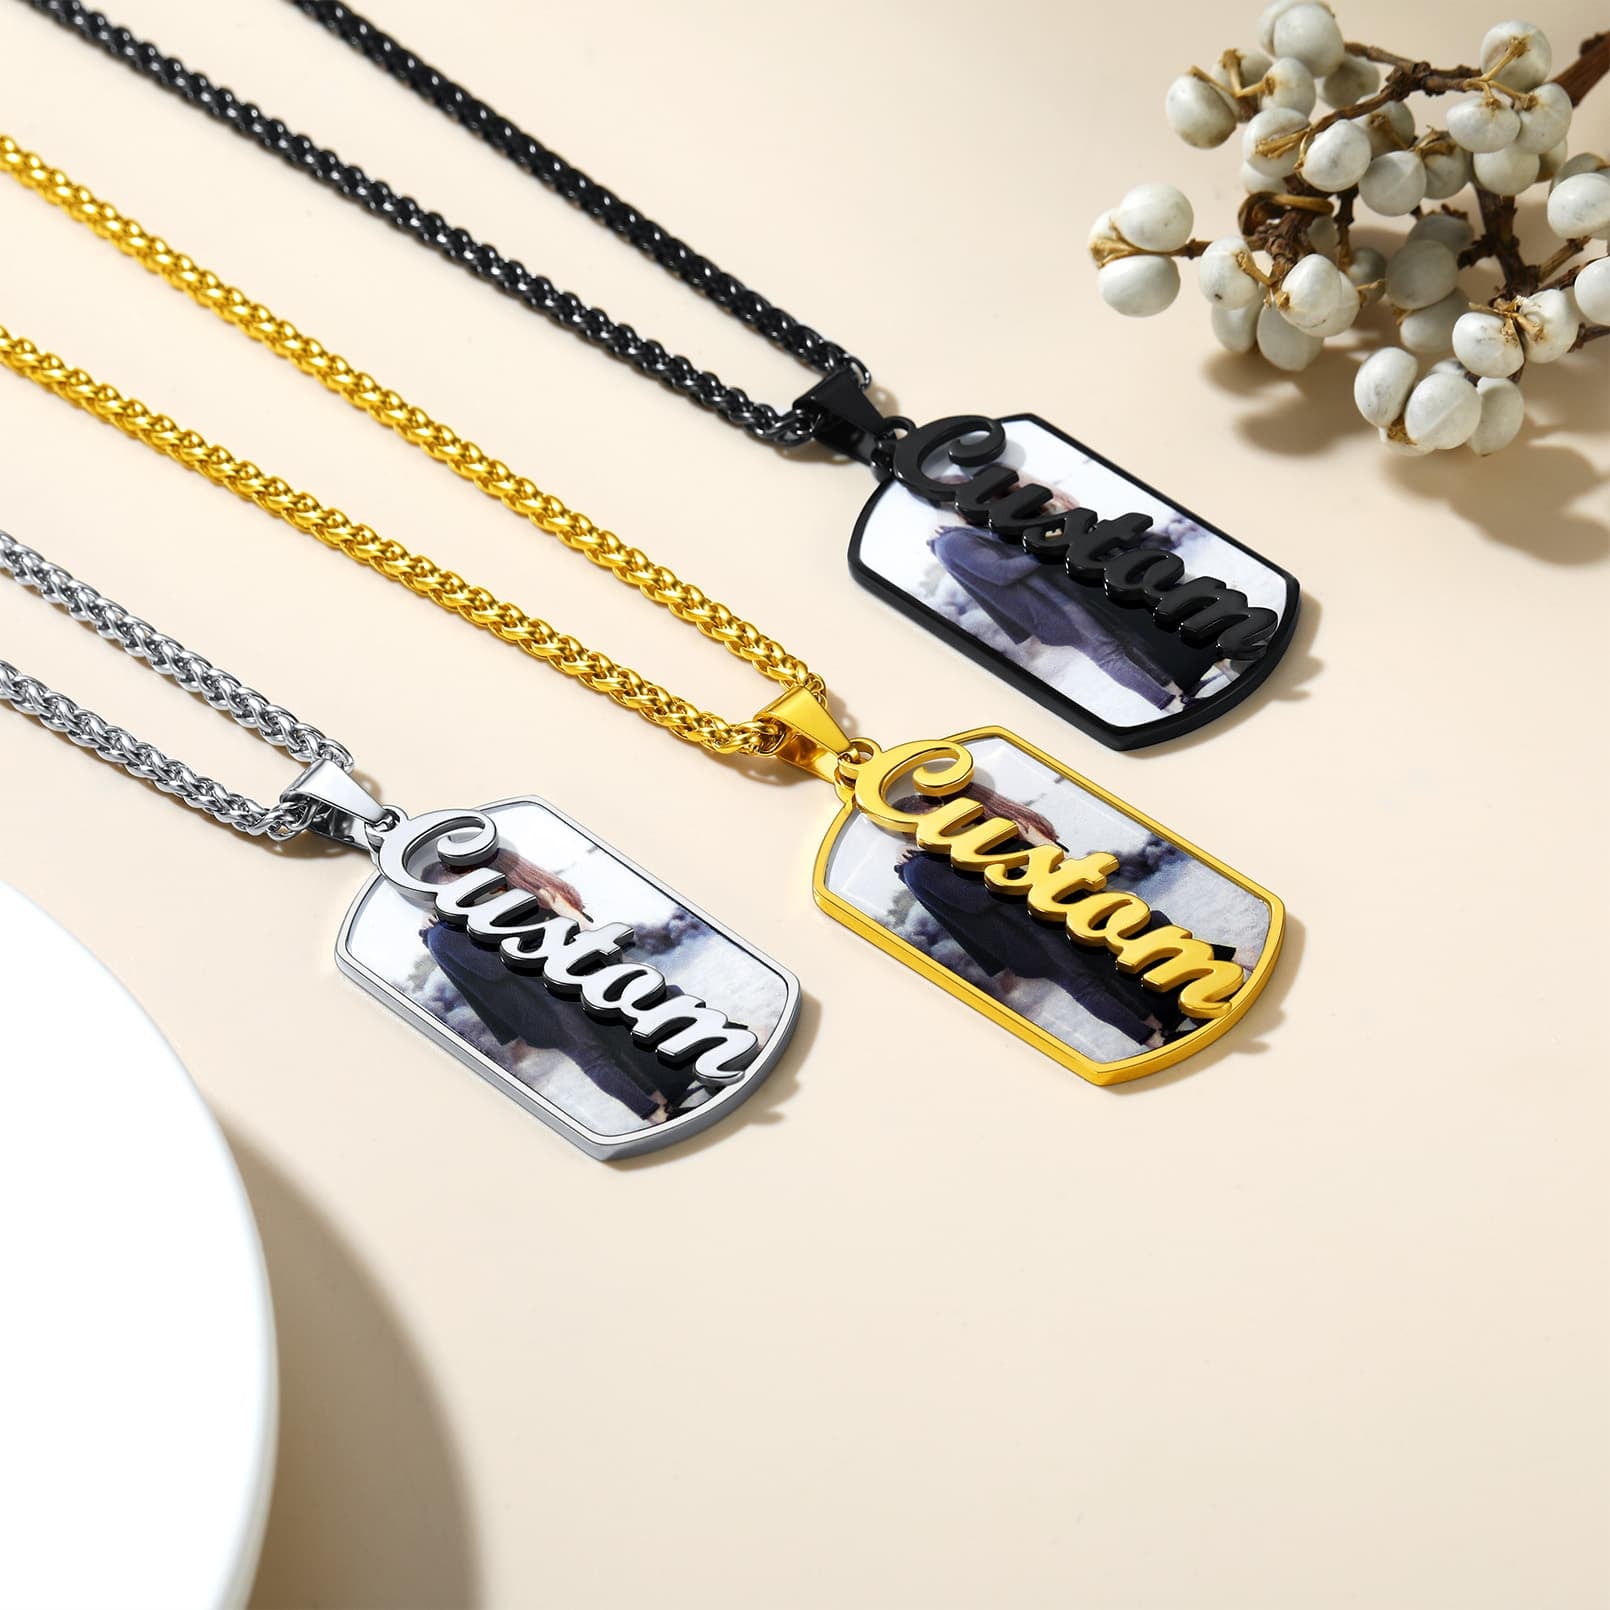 Birthstonesjewelry Personalized Dog Tag Name Necklace 3 Colors